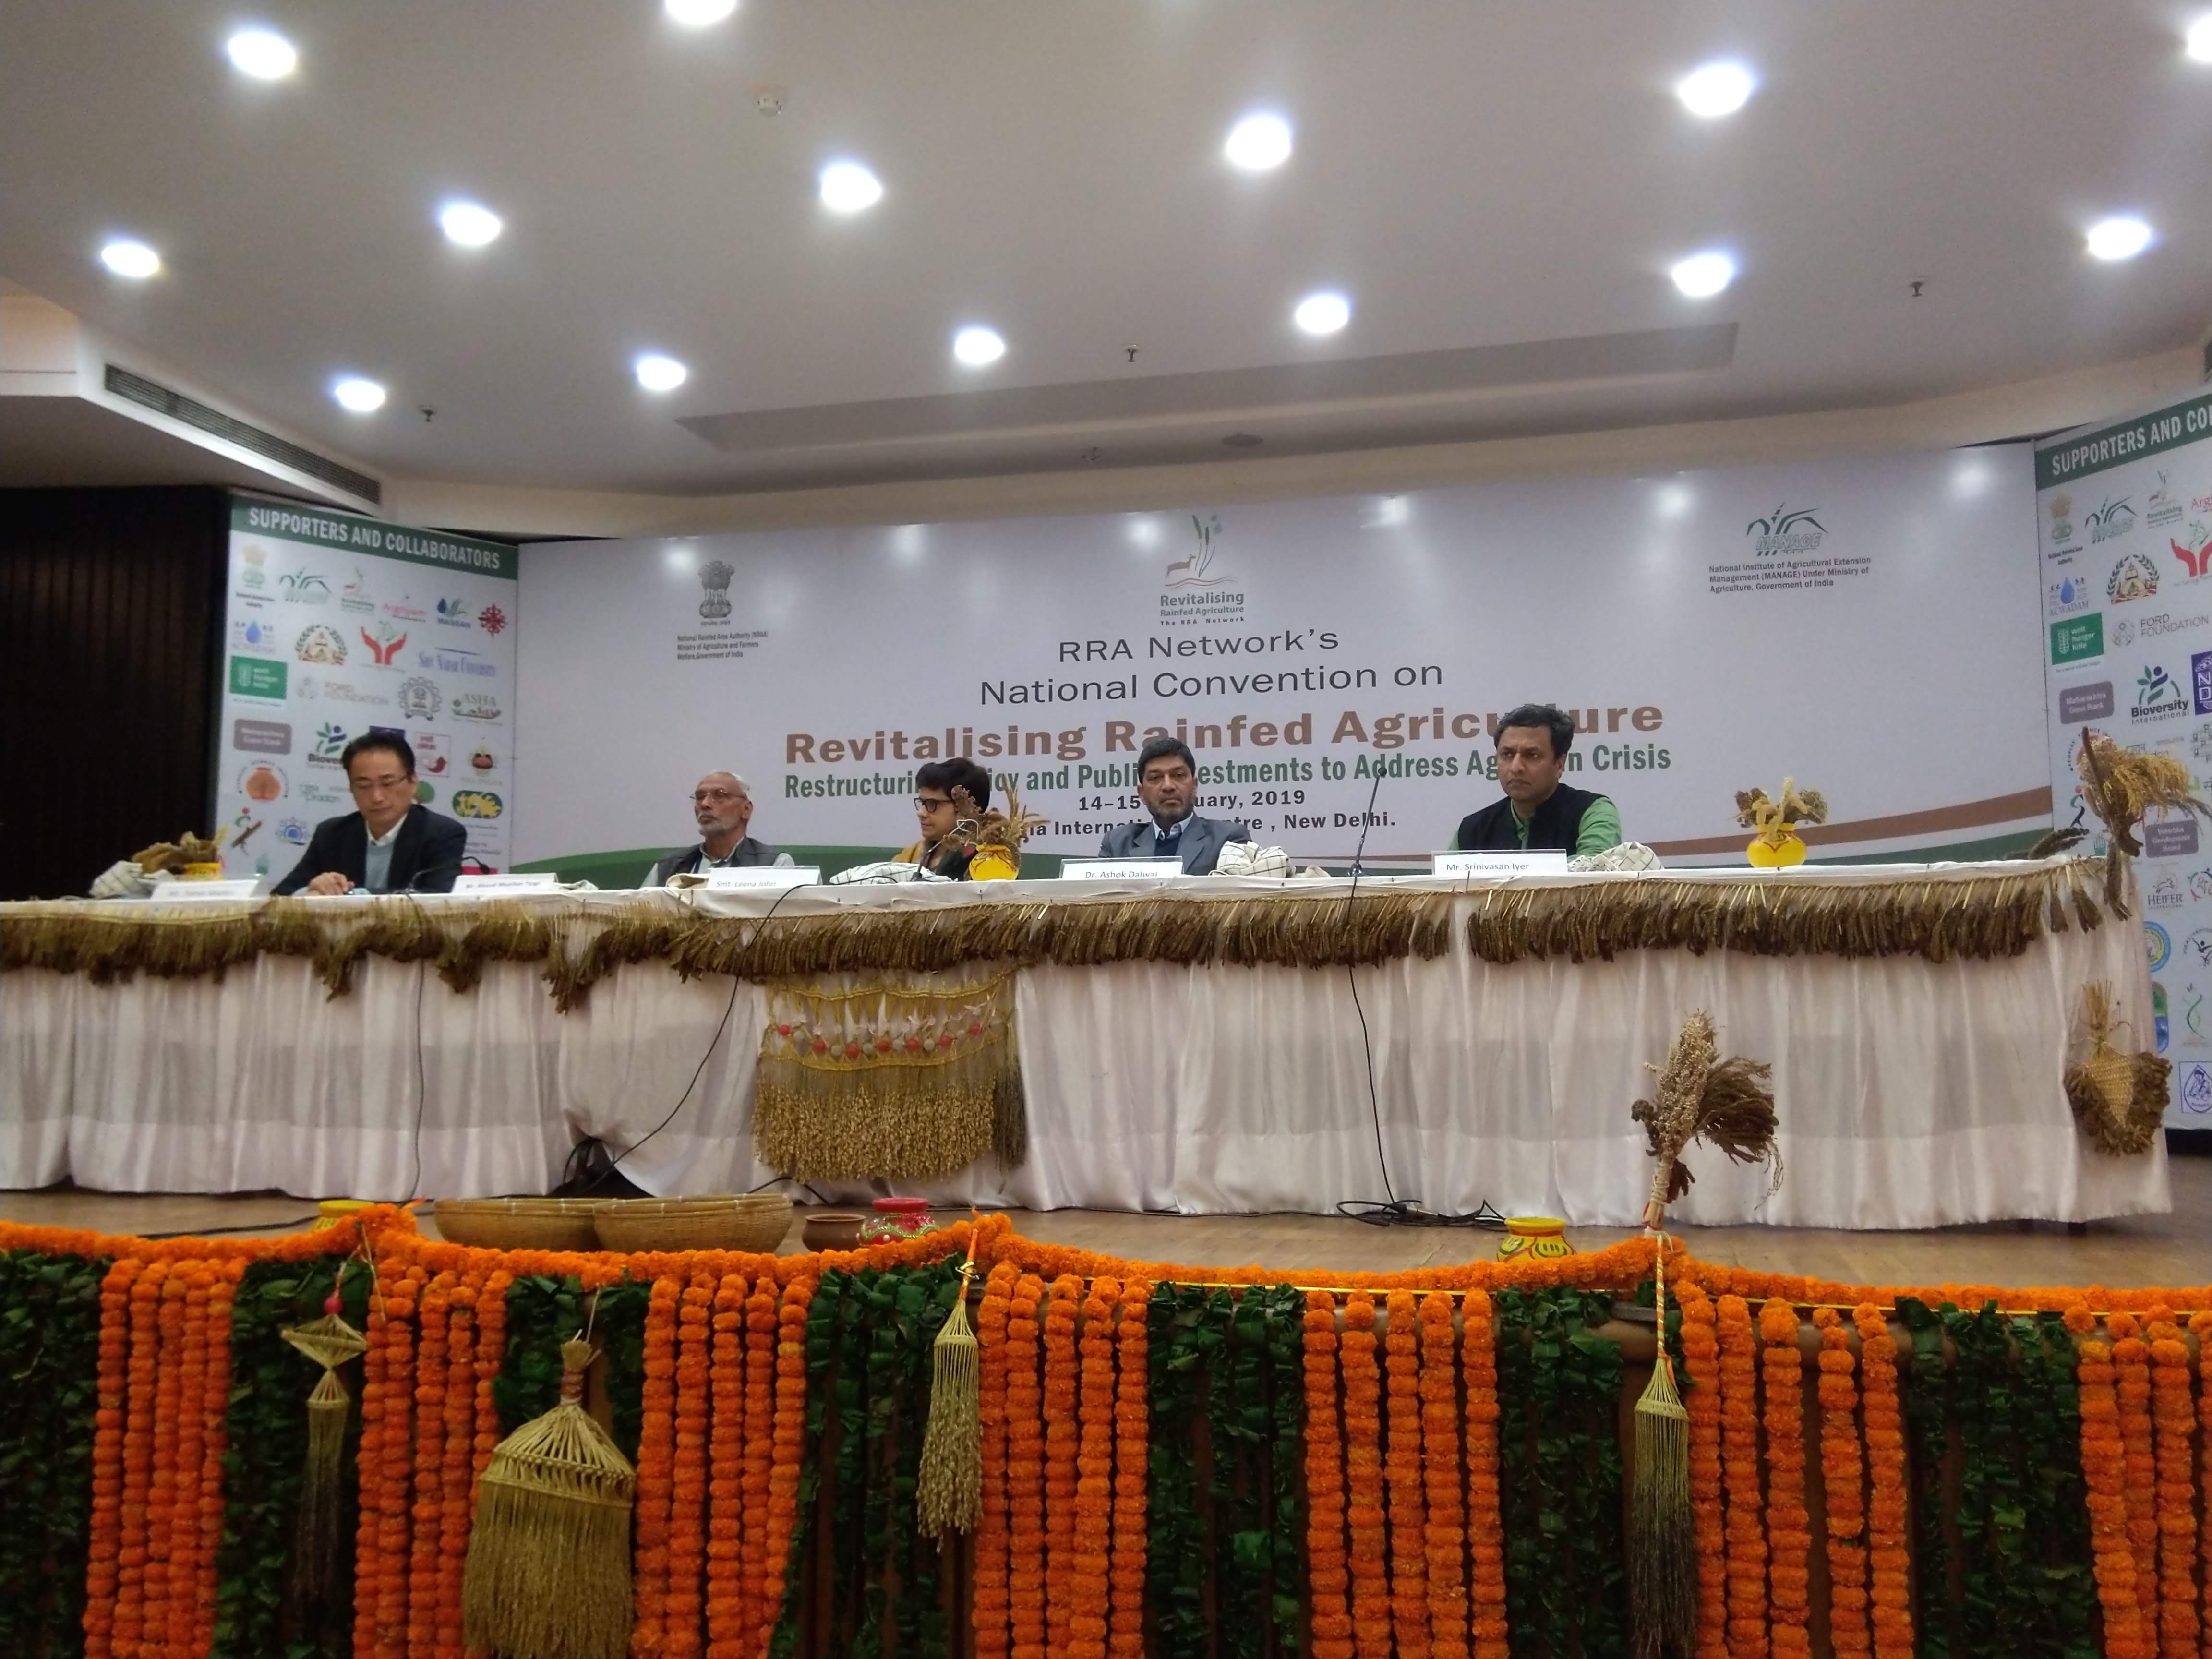 National Convention on Revitalising Rainfed Agriculture